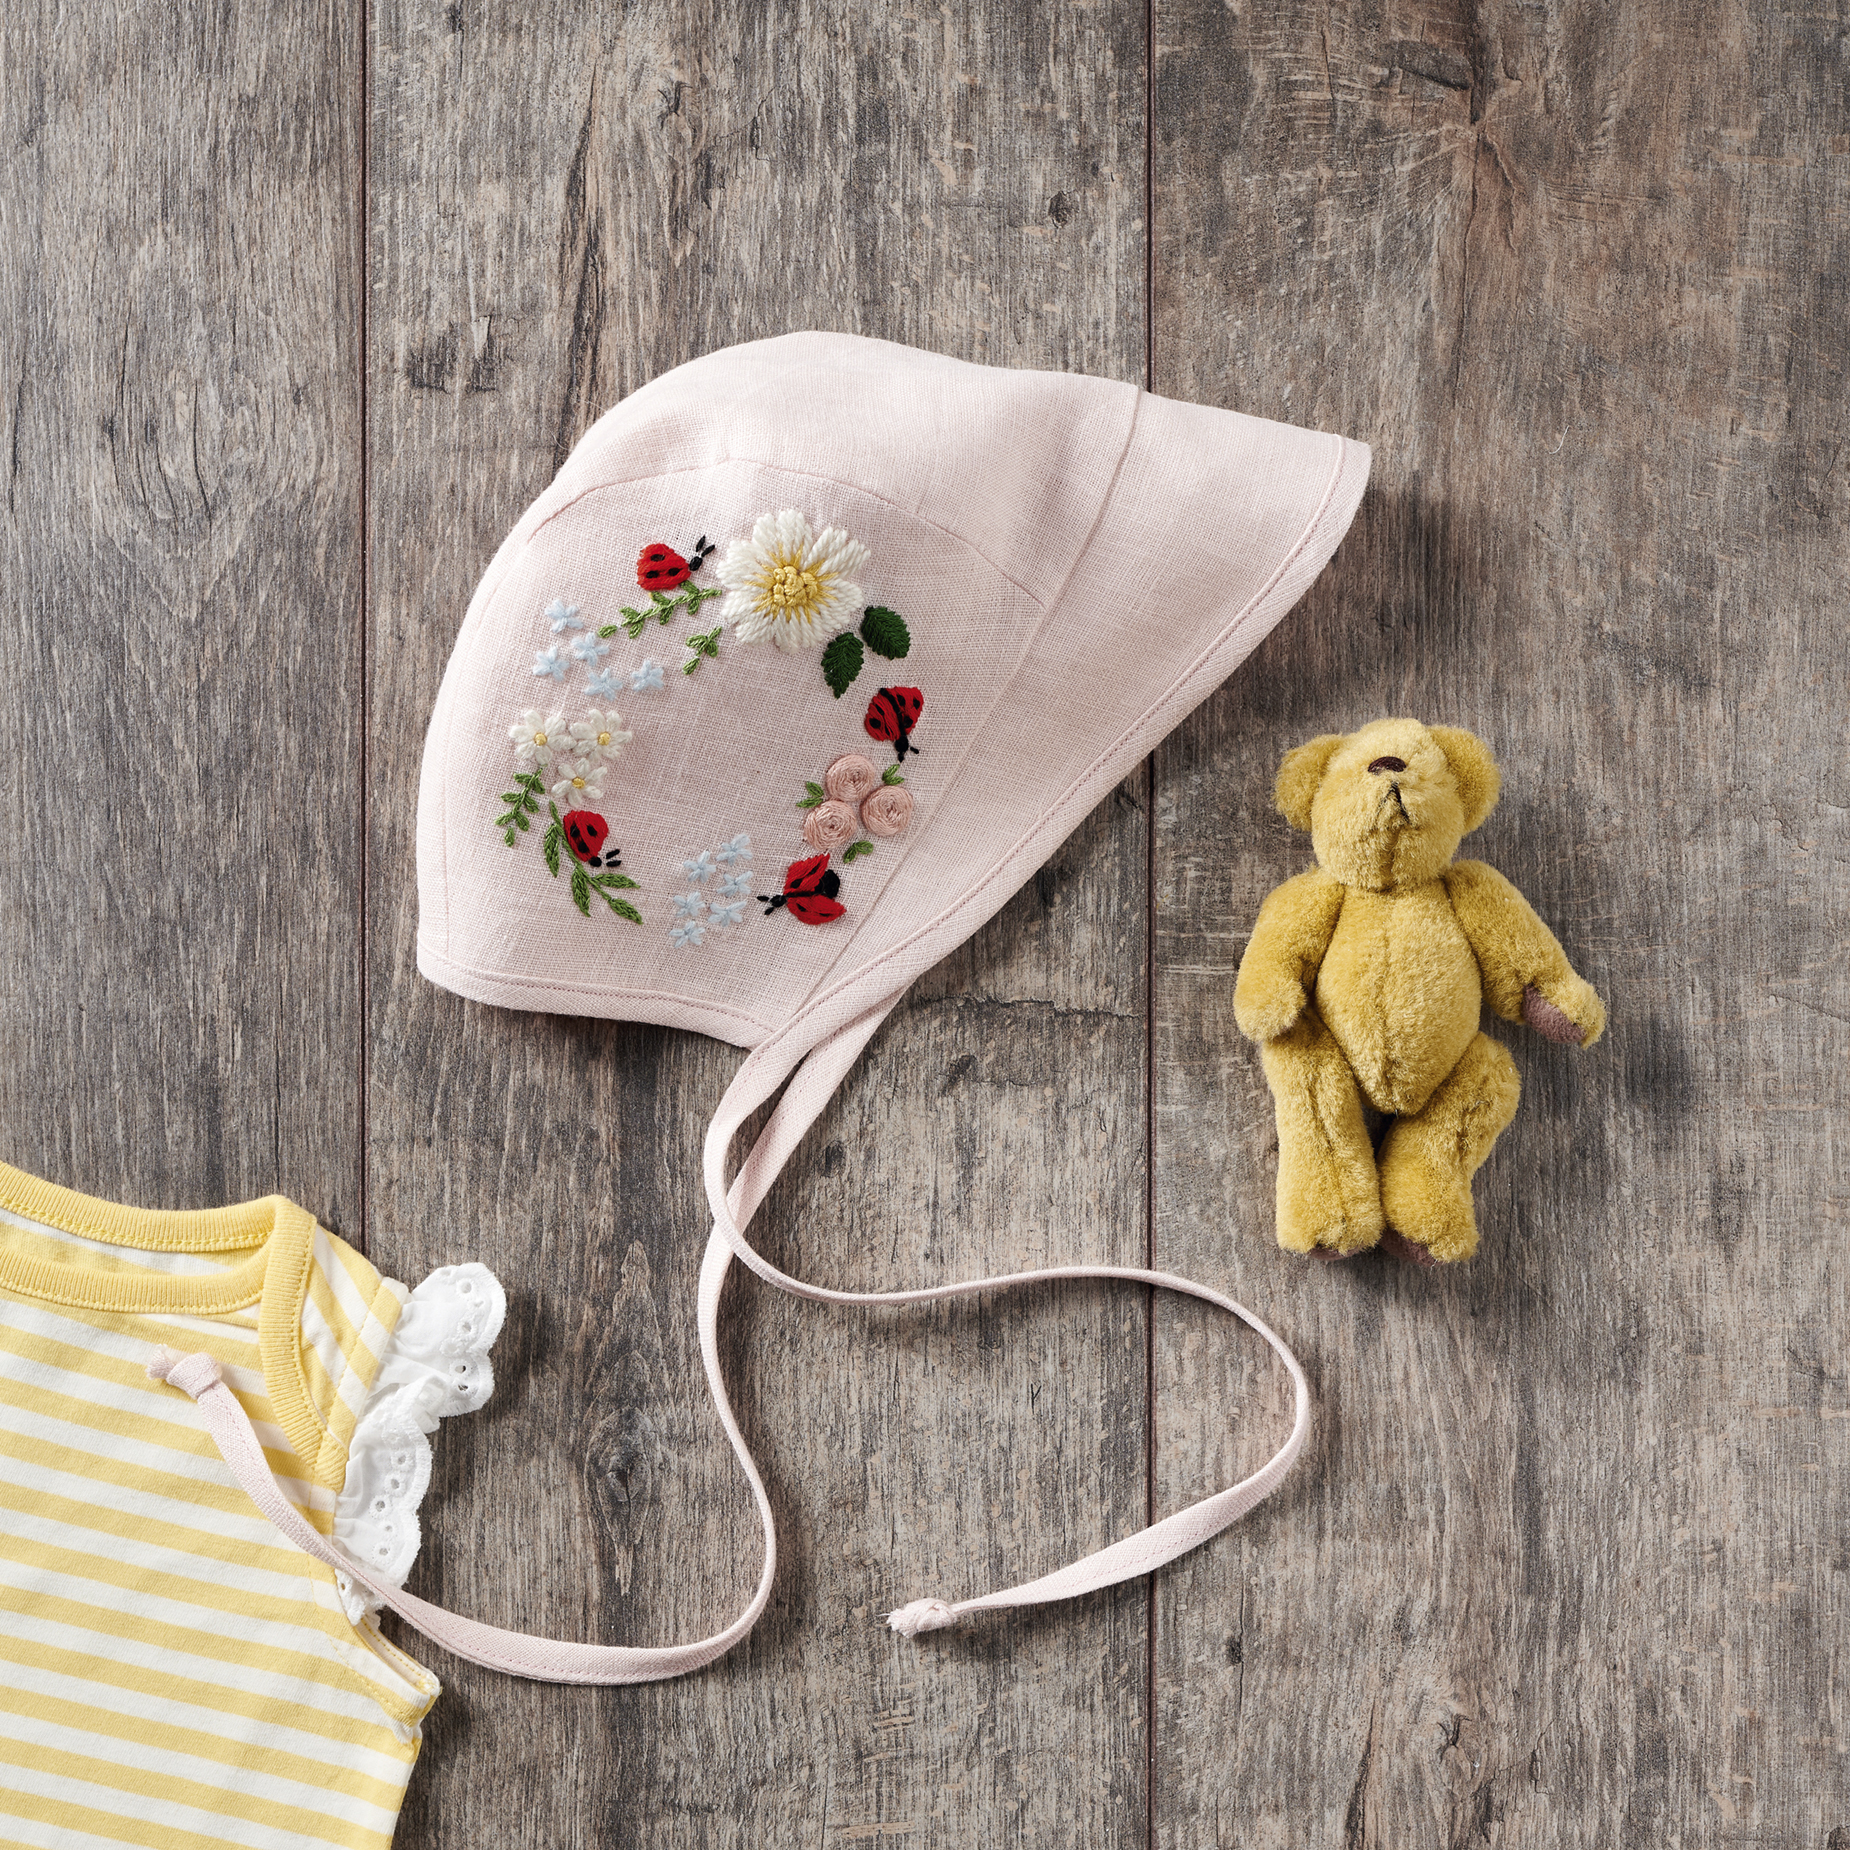 Light pink baby bonnet with ladybird and floral embroidery details. It sits on a dark wood background with a yellow teddy bear next to it and a white and yellow stripy top to the bottom left.